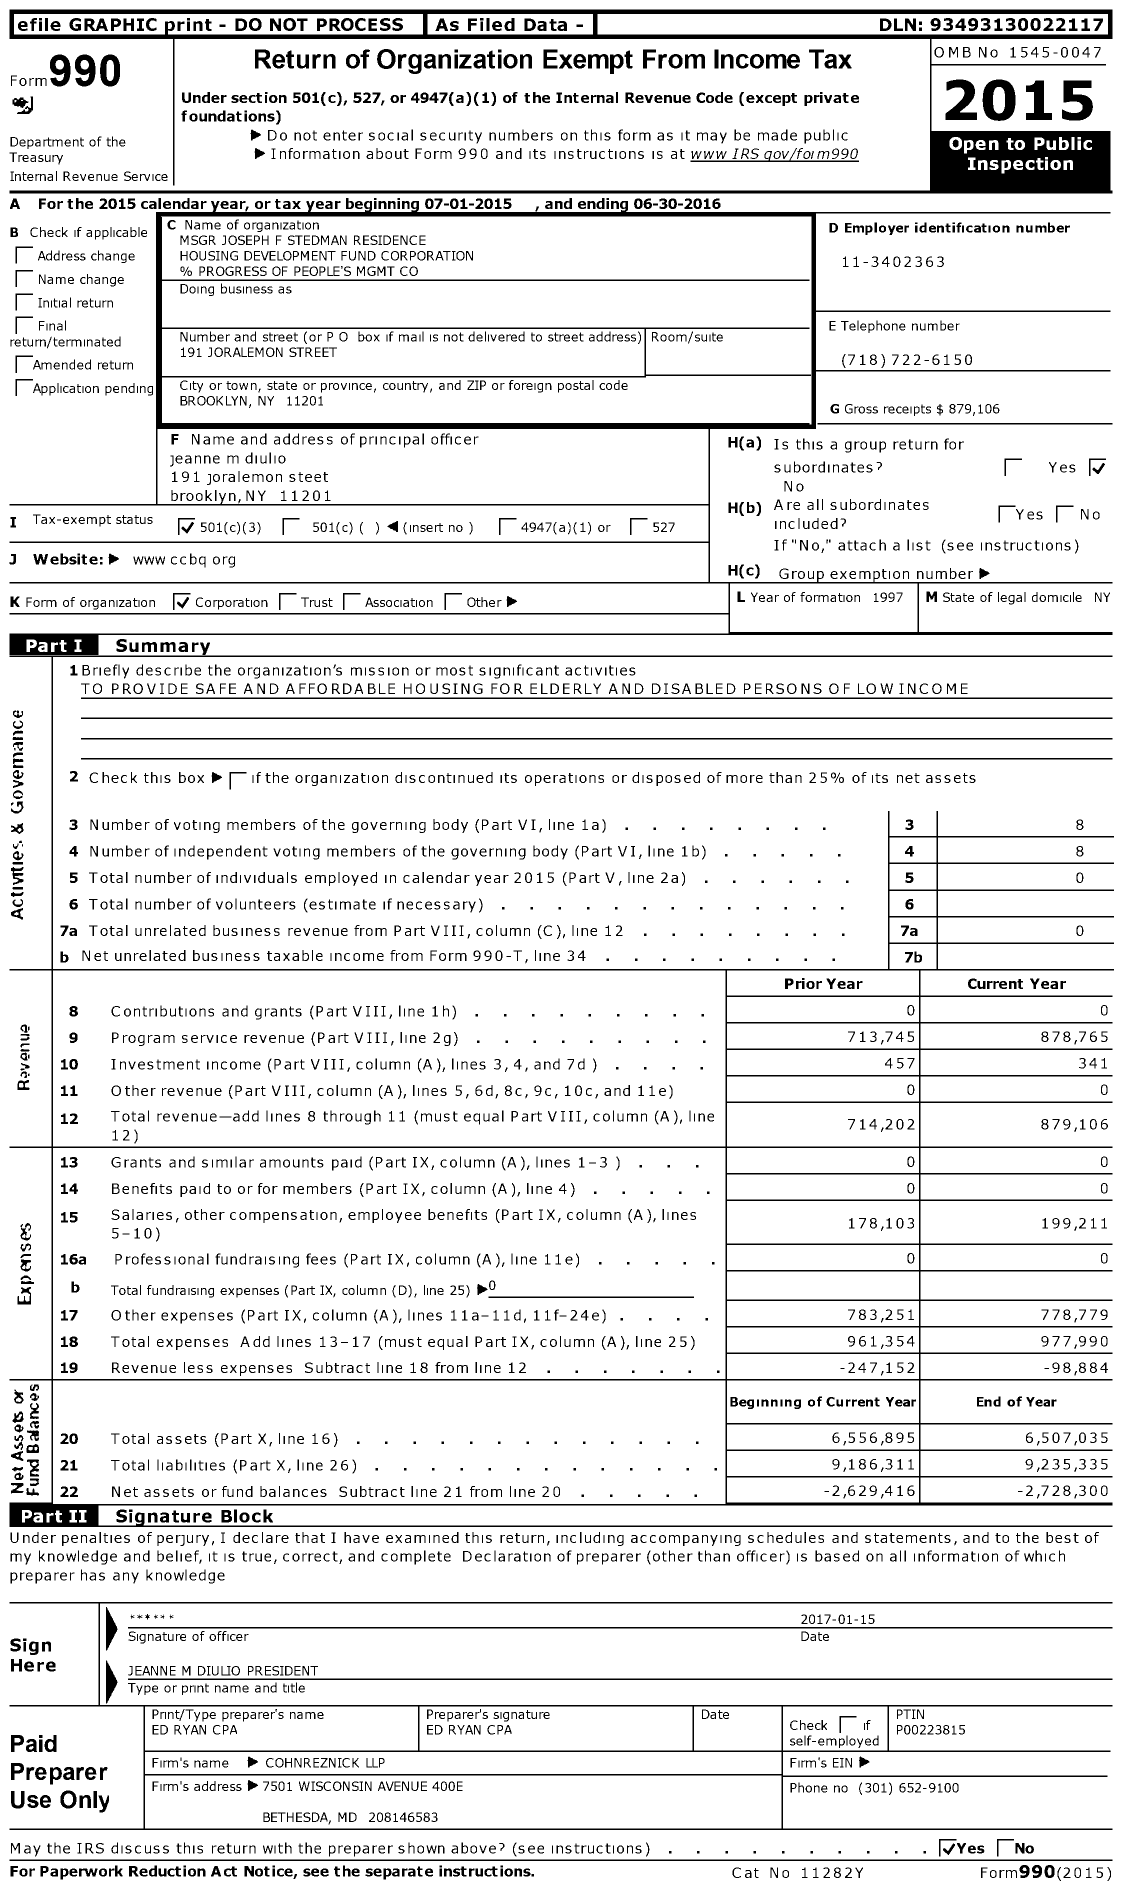 Image of first page of 2015 Form 990 for MSGR Joseph F Stedman Residence Housing Development Fund Corporation